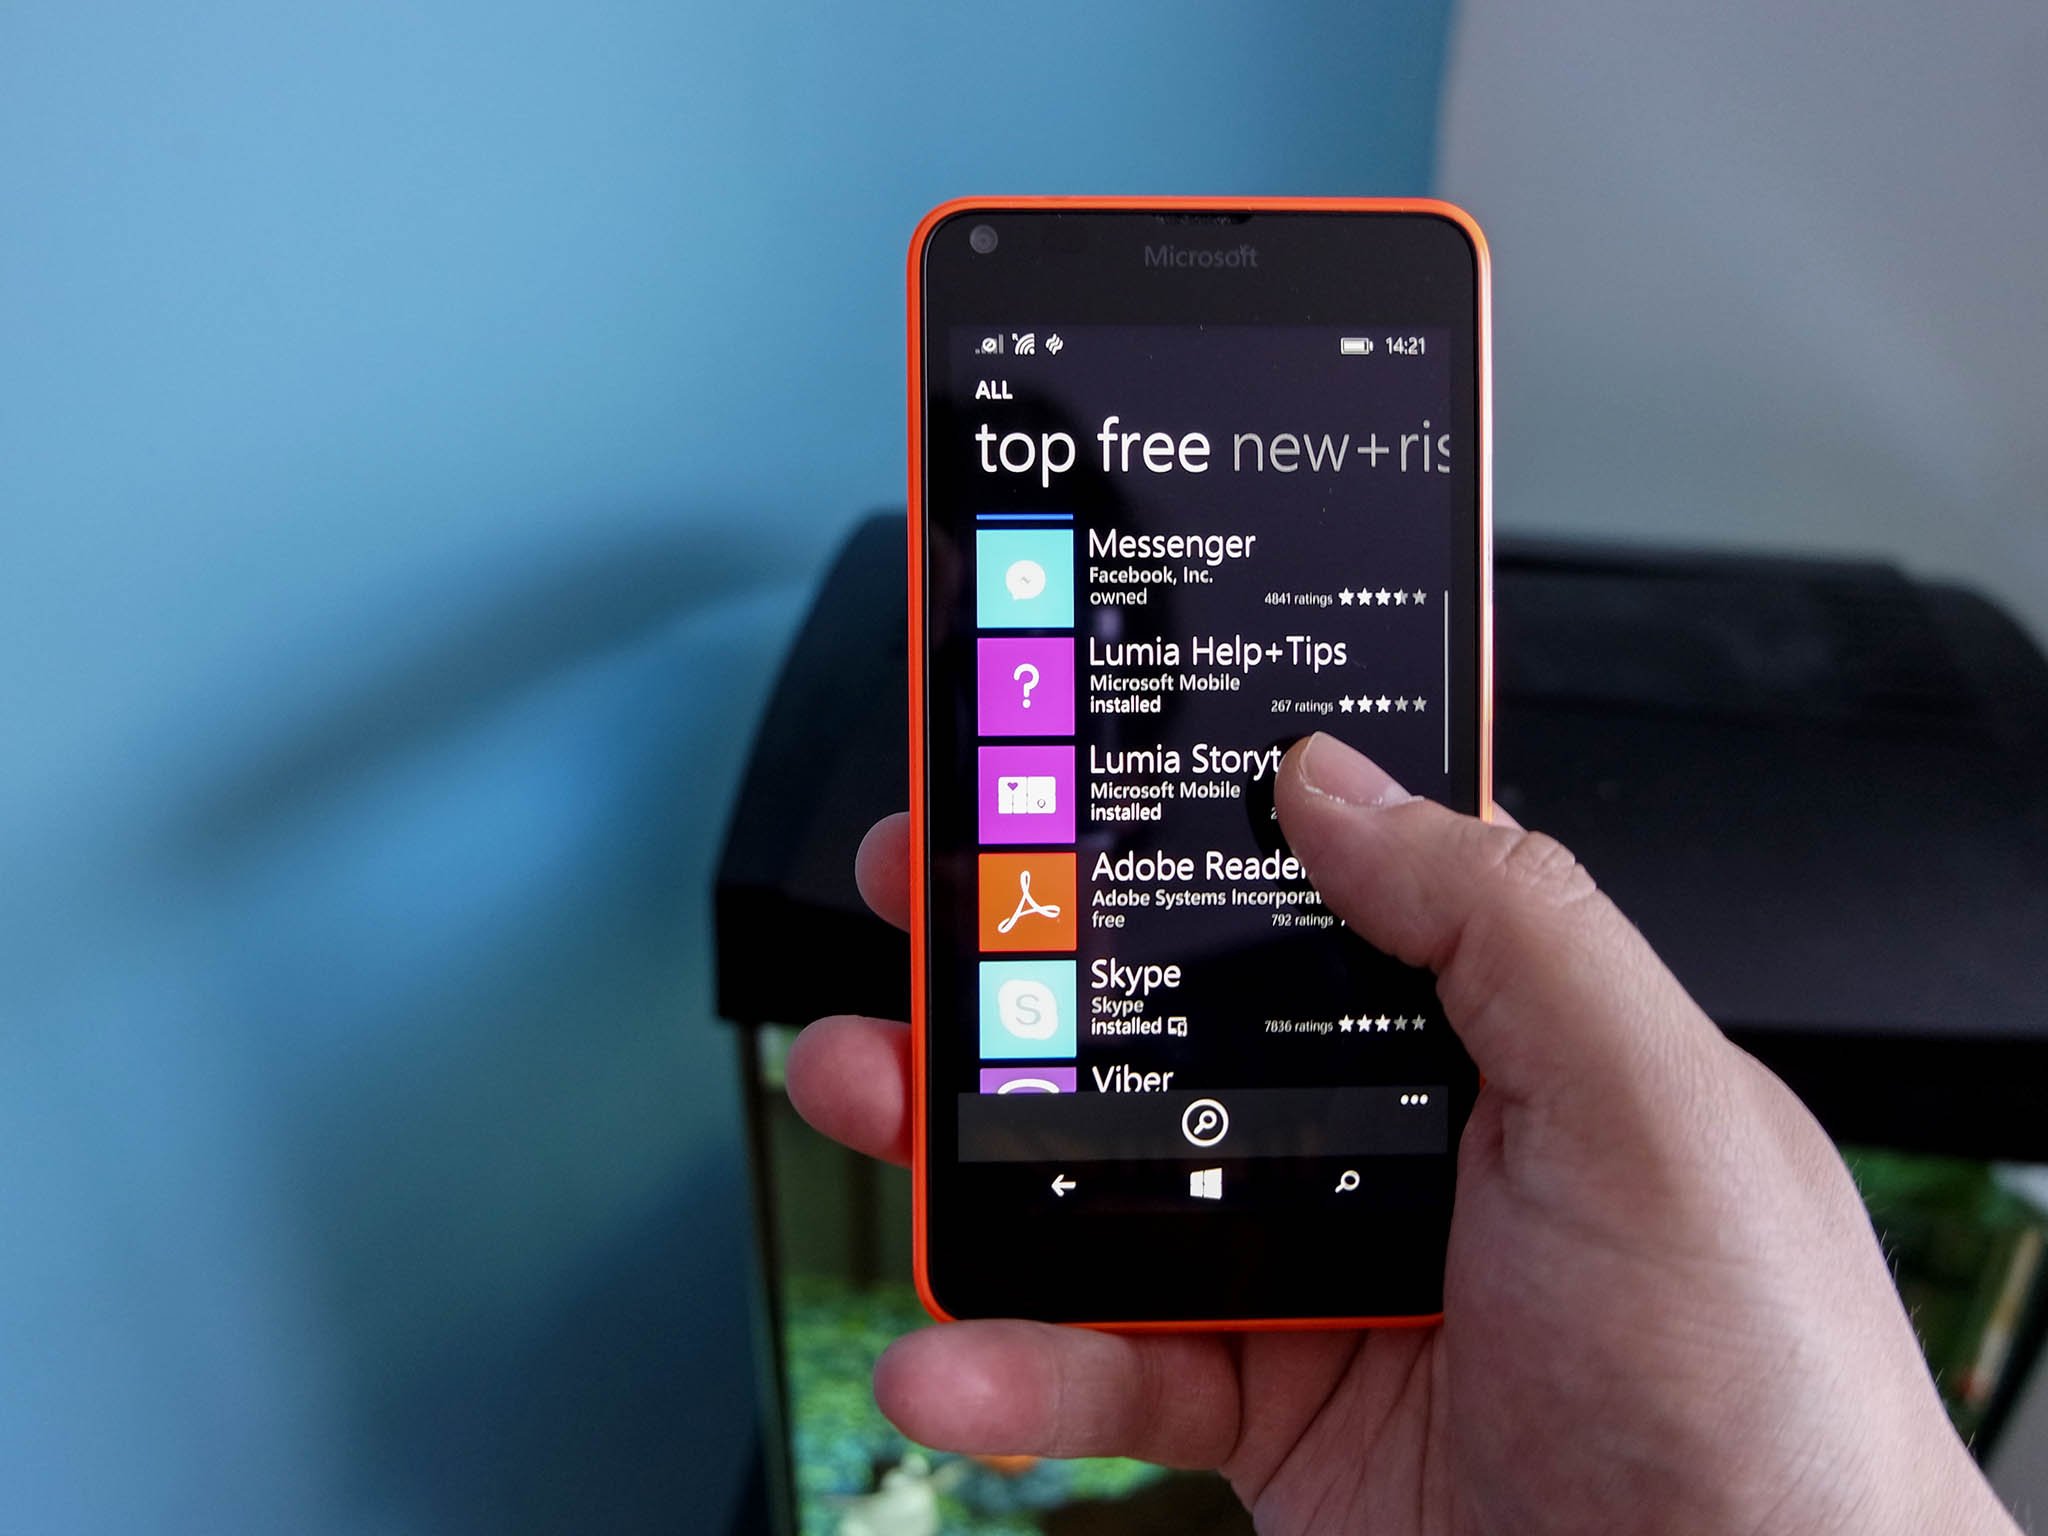 metropcs to launch lumia 640 on june 22 for $39 after instant rebate